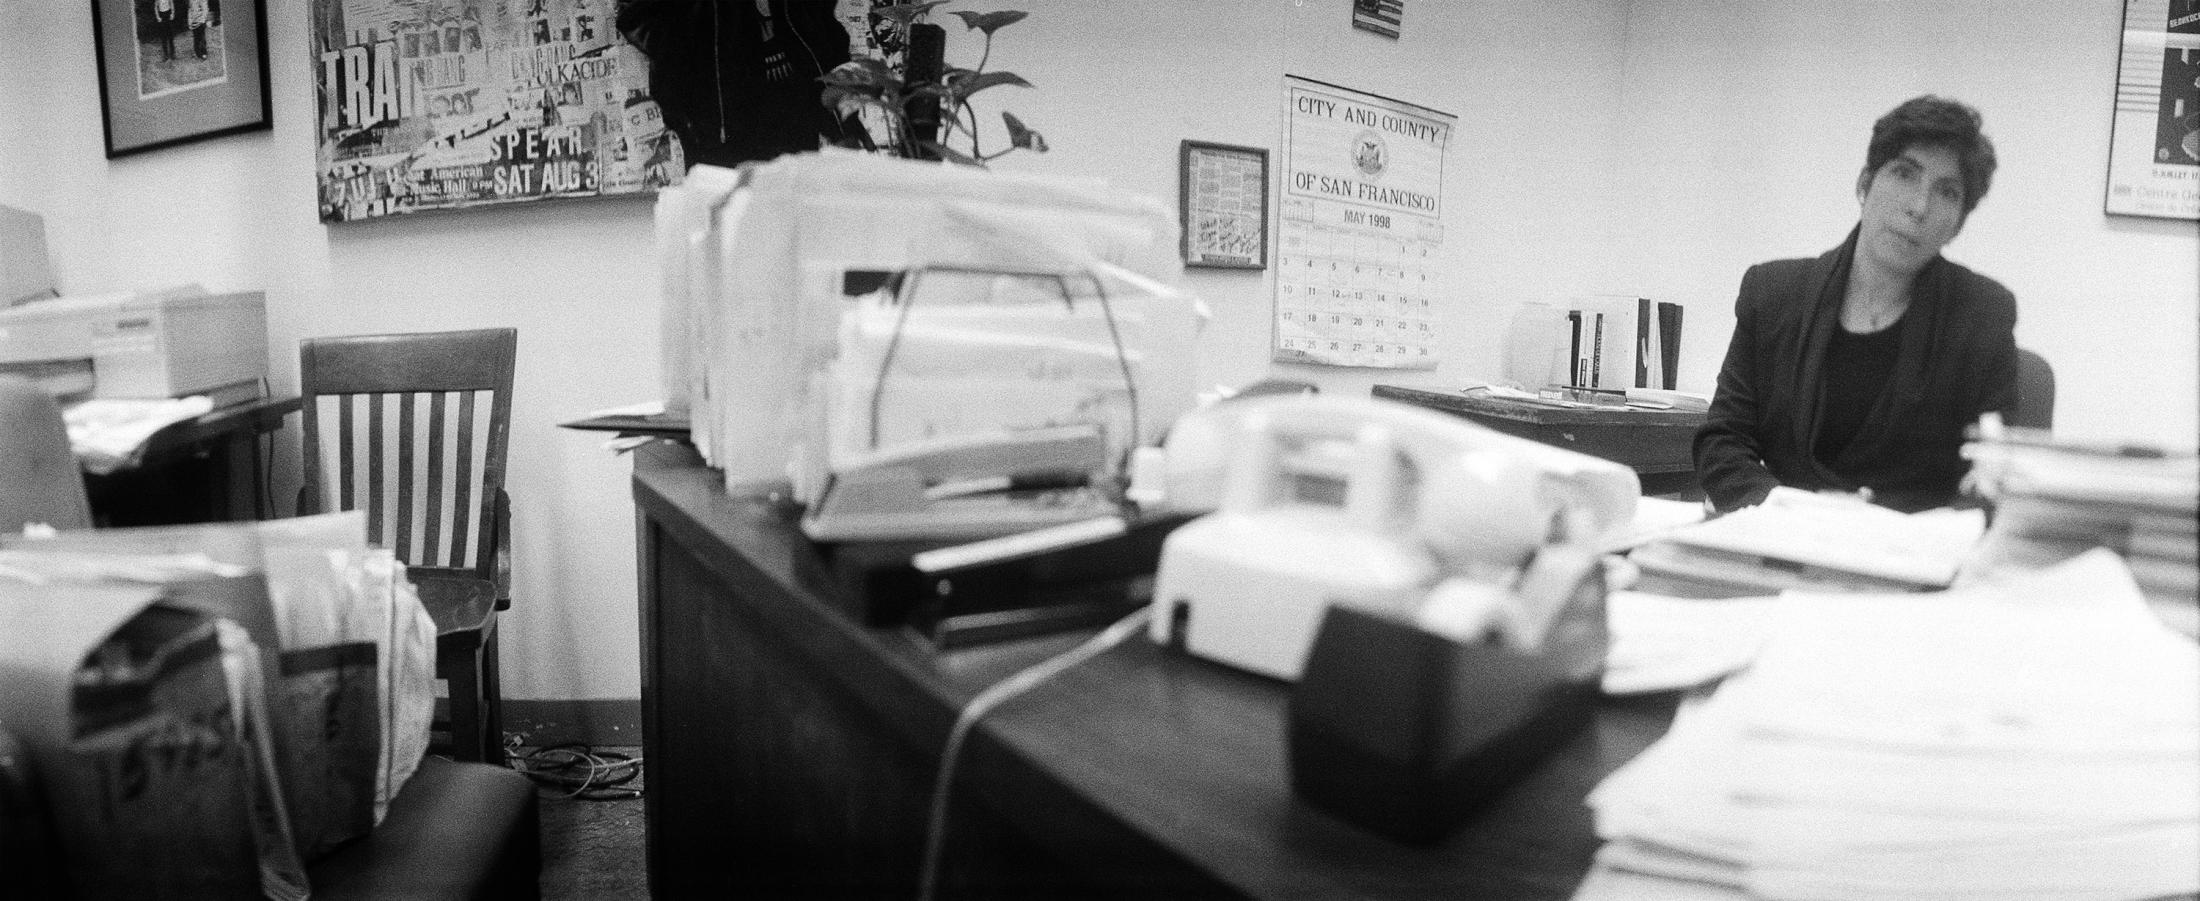 Archives of Abuse Revisit - Susan Breall at her desk, San Francisco District...